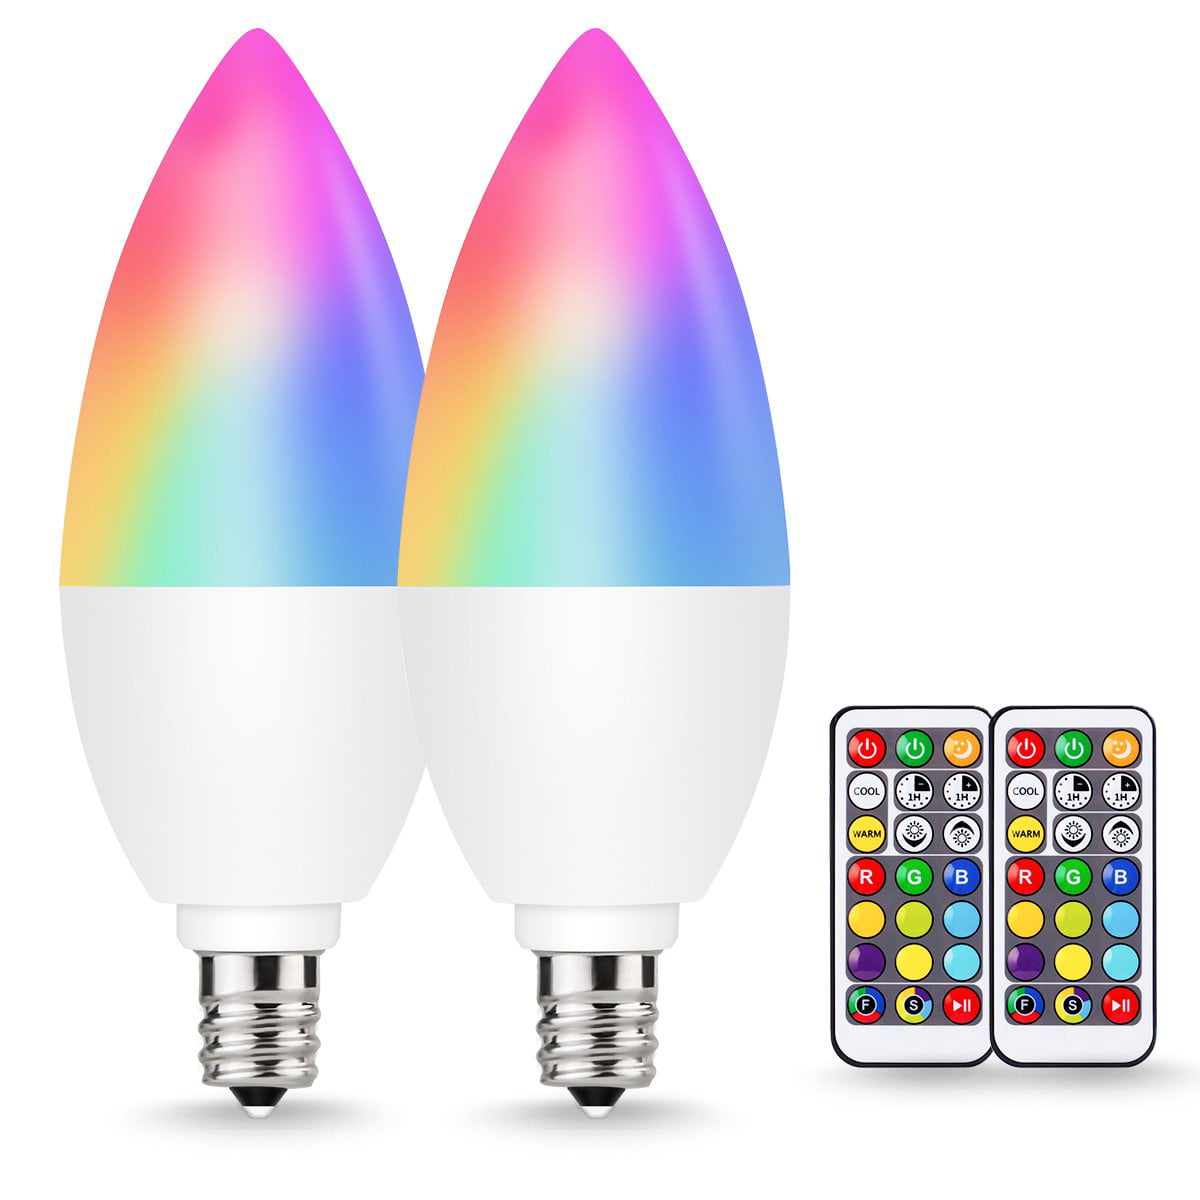 RGBW LED Bulbs Light Bulbs 100W Equivalent 1000lm Color Changing With Remote, 